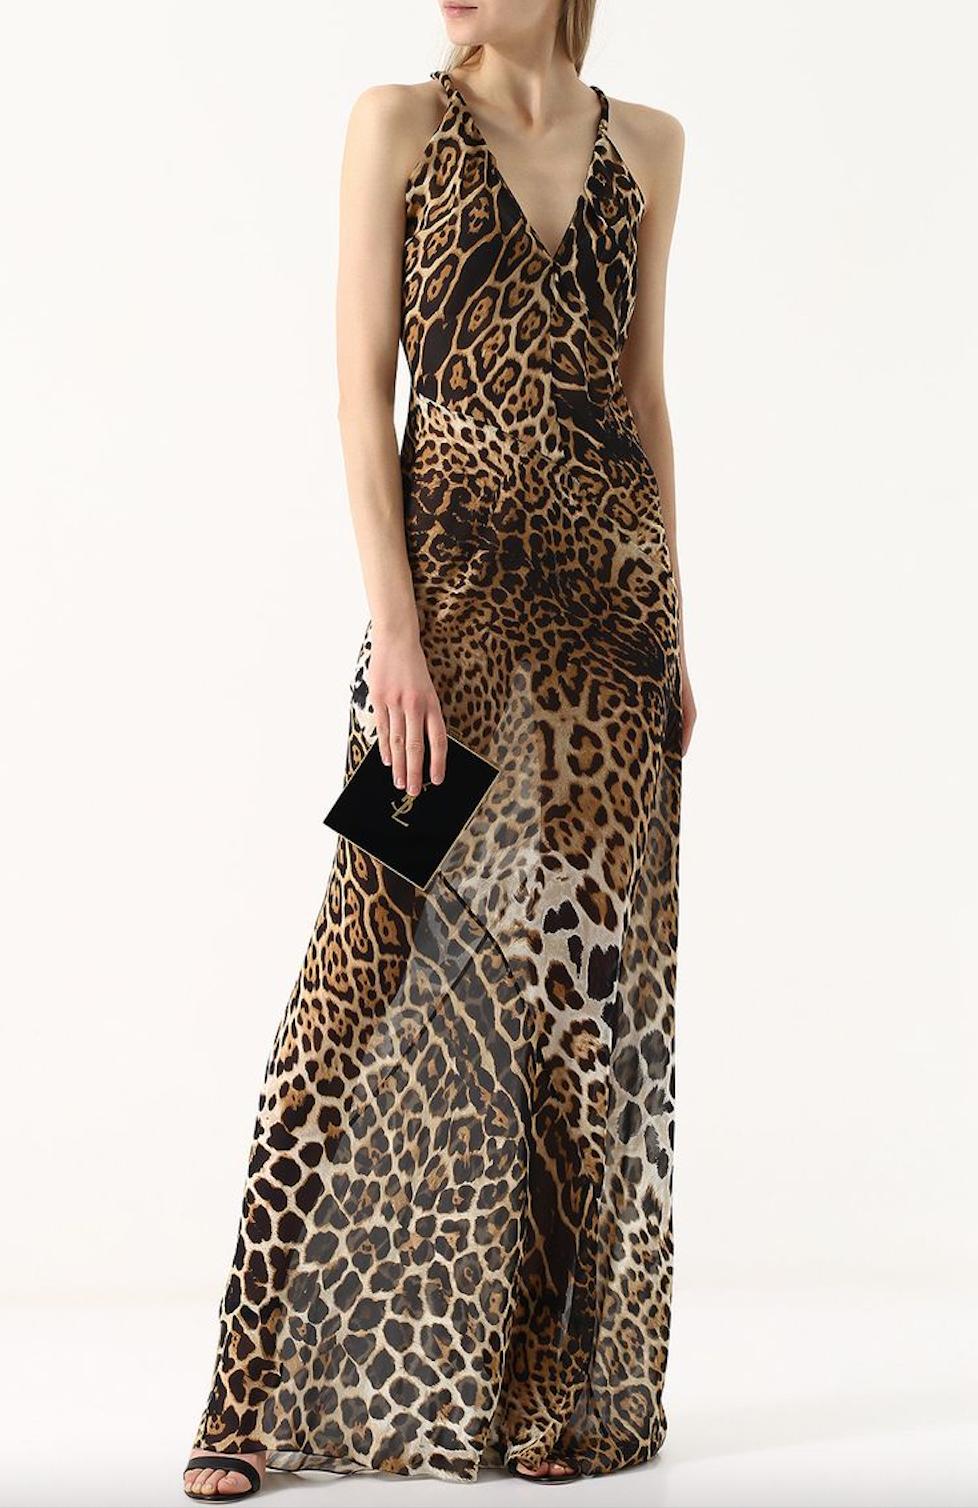 Saint Laurent Semi Sheer Twisted Straps Silk Leopard Print Gown

This striking dress from Saint Laurent features twisted strap detail, floor length silhouette, and semi sheer silk fabric. A classic dress that makes a statement. Brand new with tags.